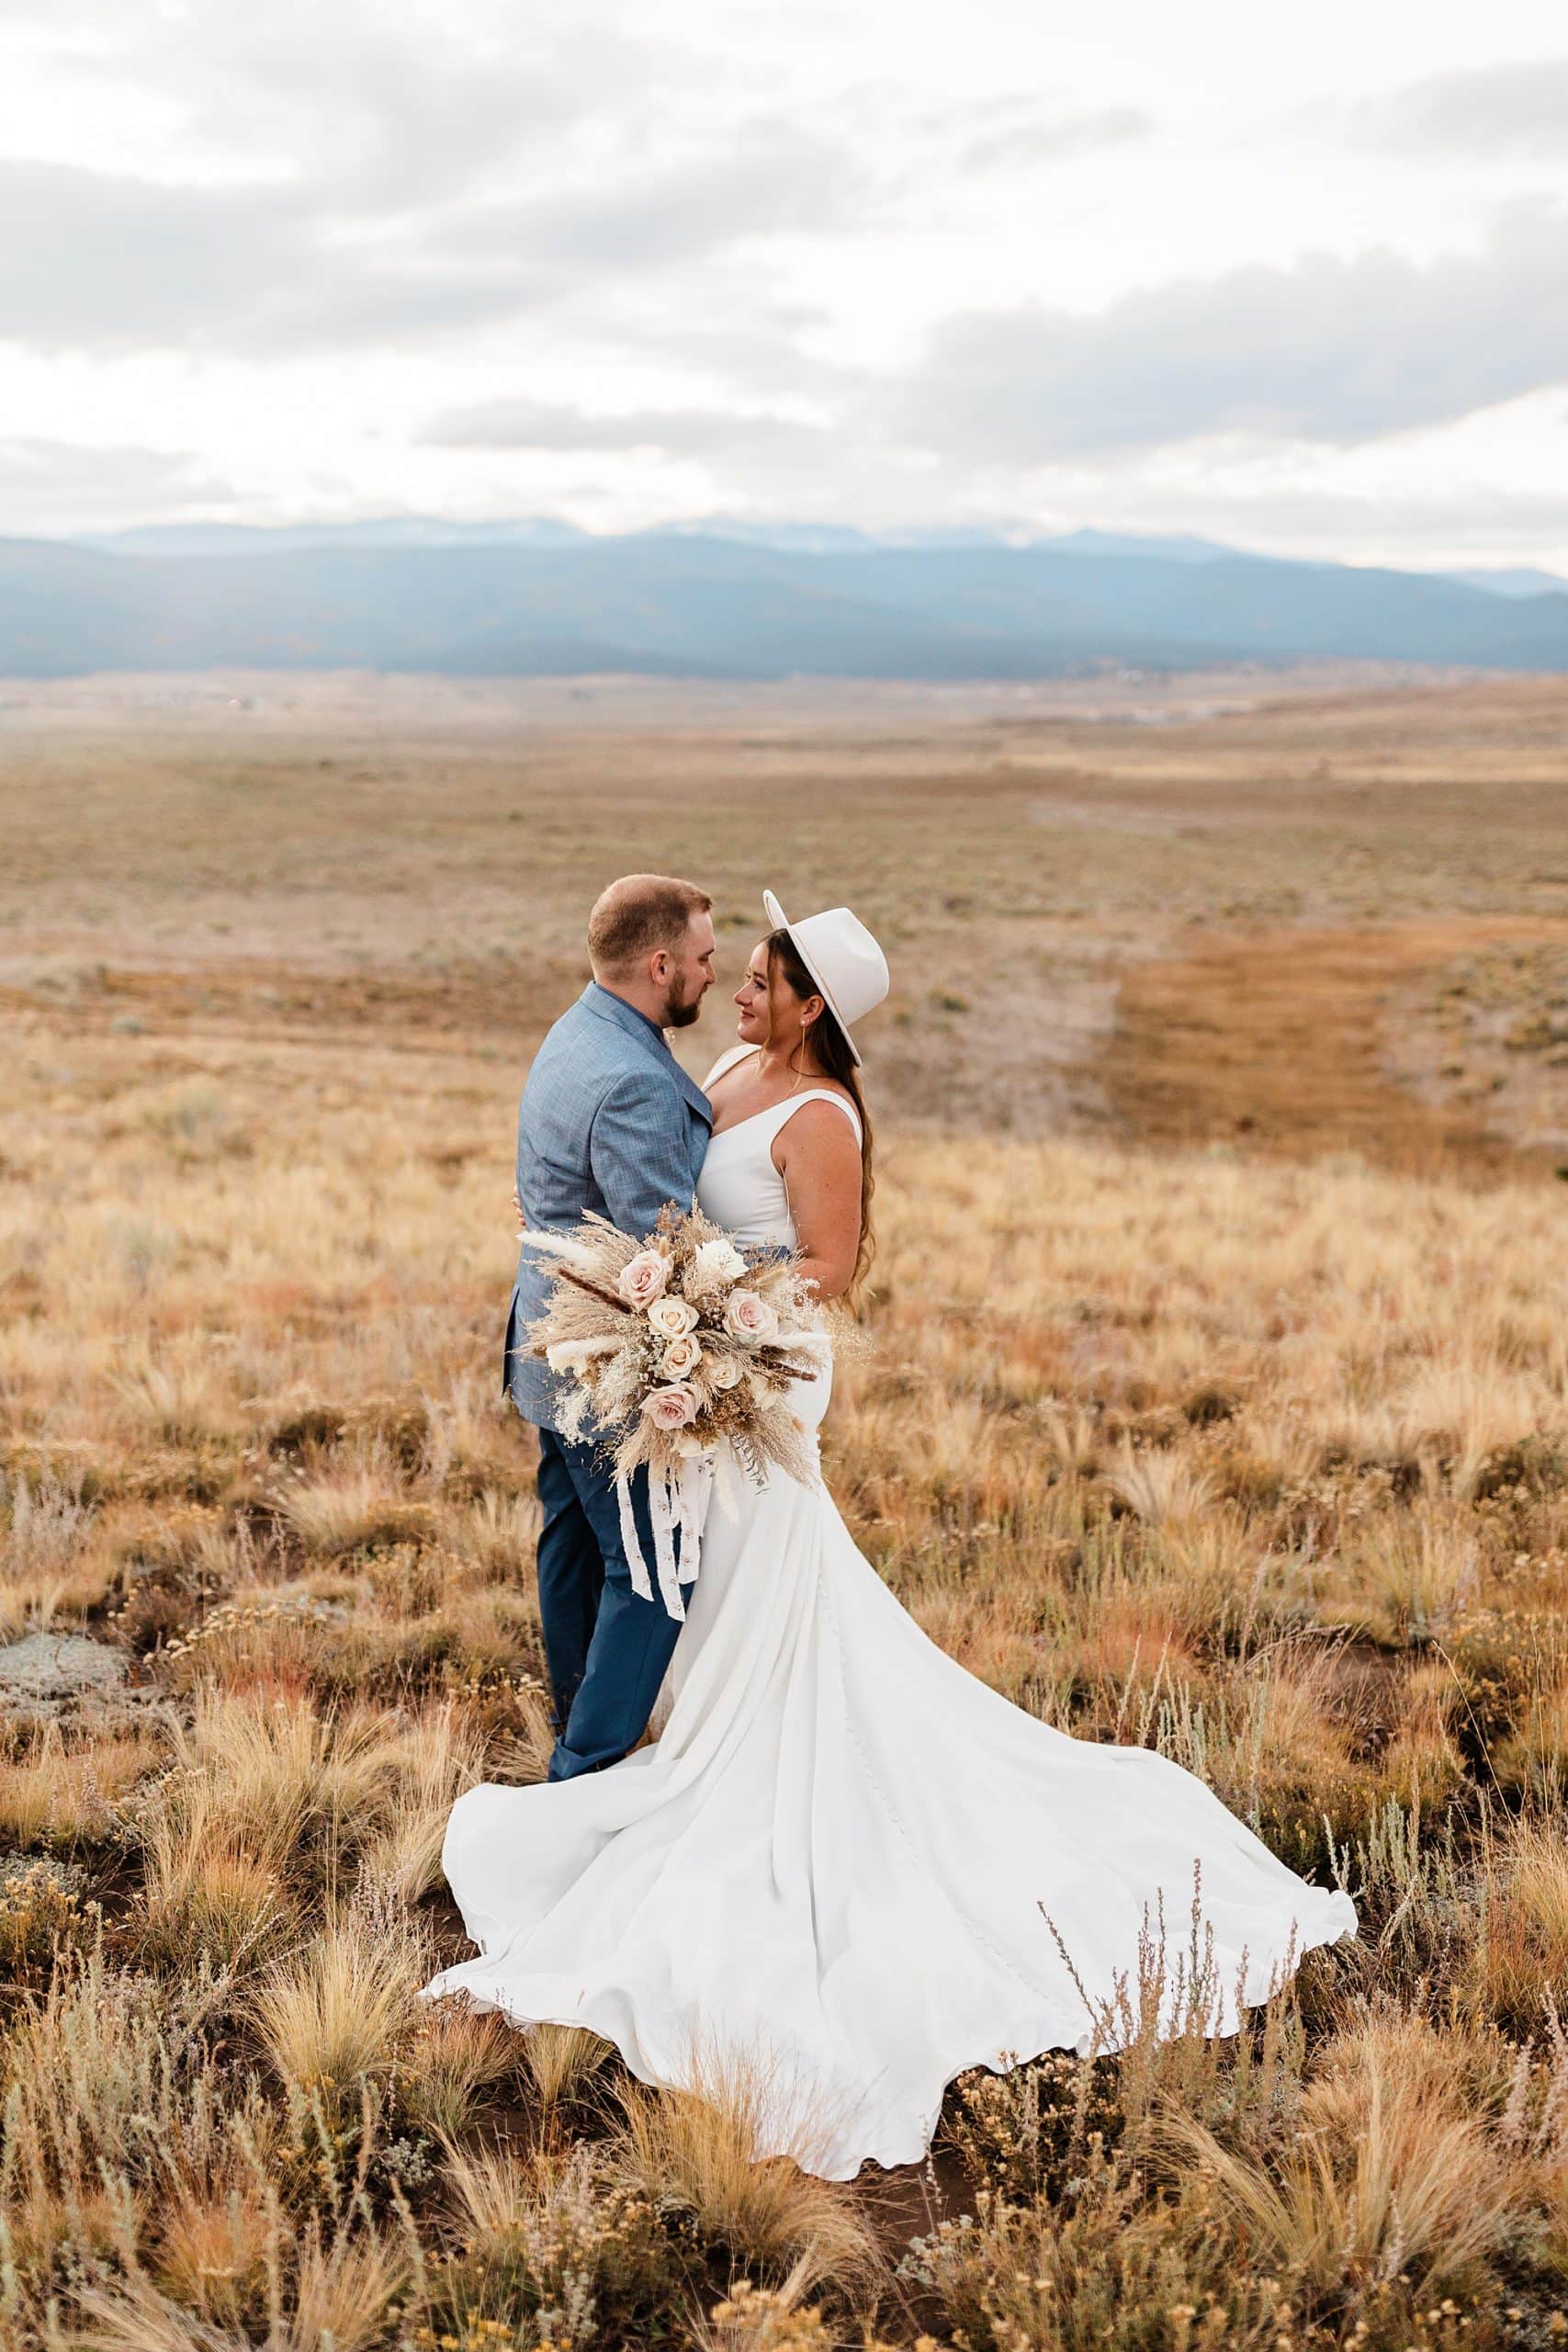 Newlyweds embrace and face on another after their elopement in Taos.